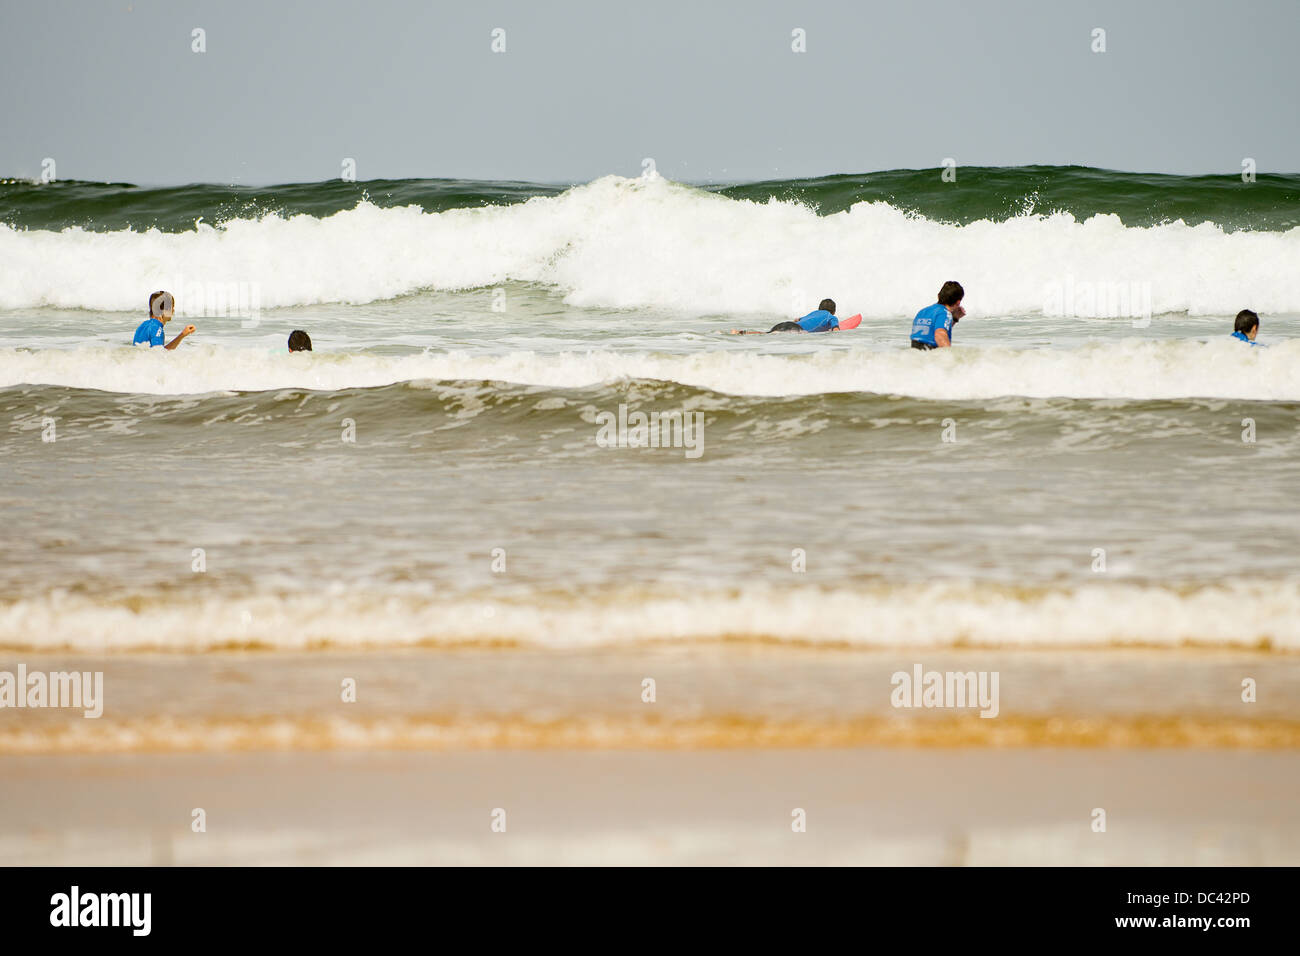 People learning to surf in big waves near beach in the sun Stock Photo